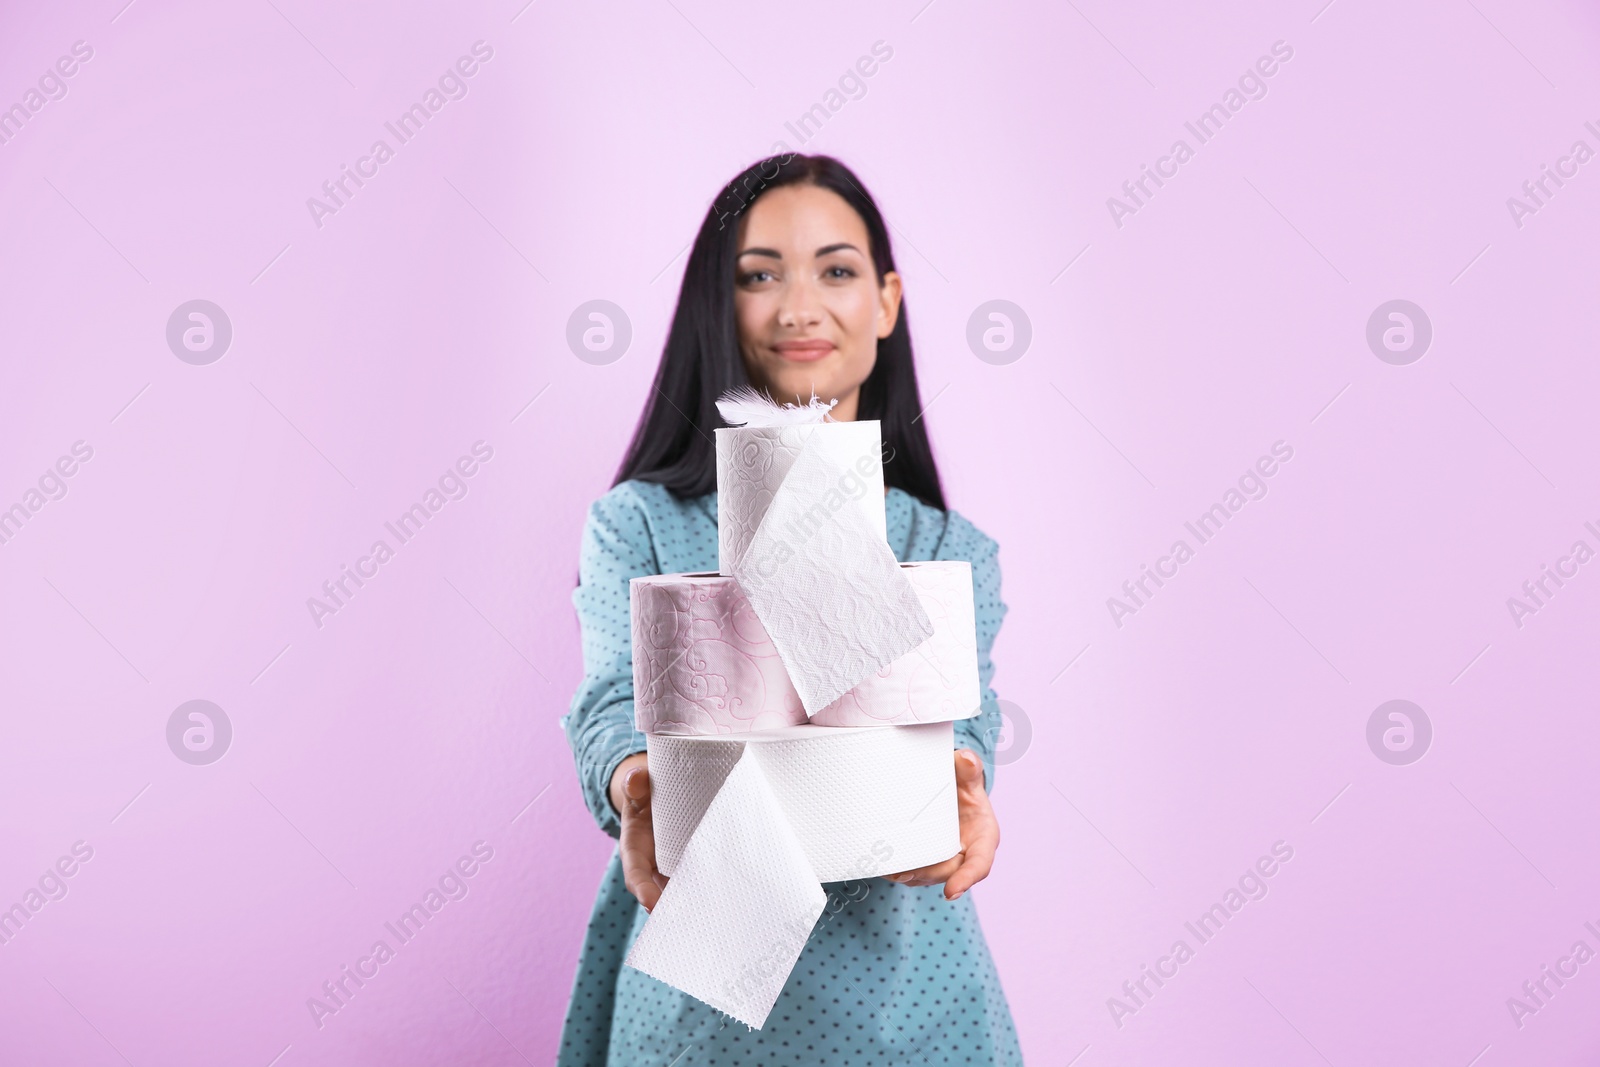 Photo of Beautiful woman holding toilet paper rolls on color background